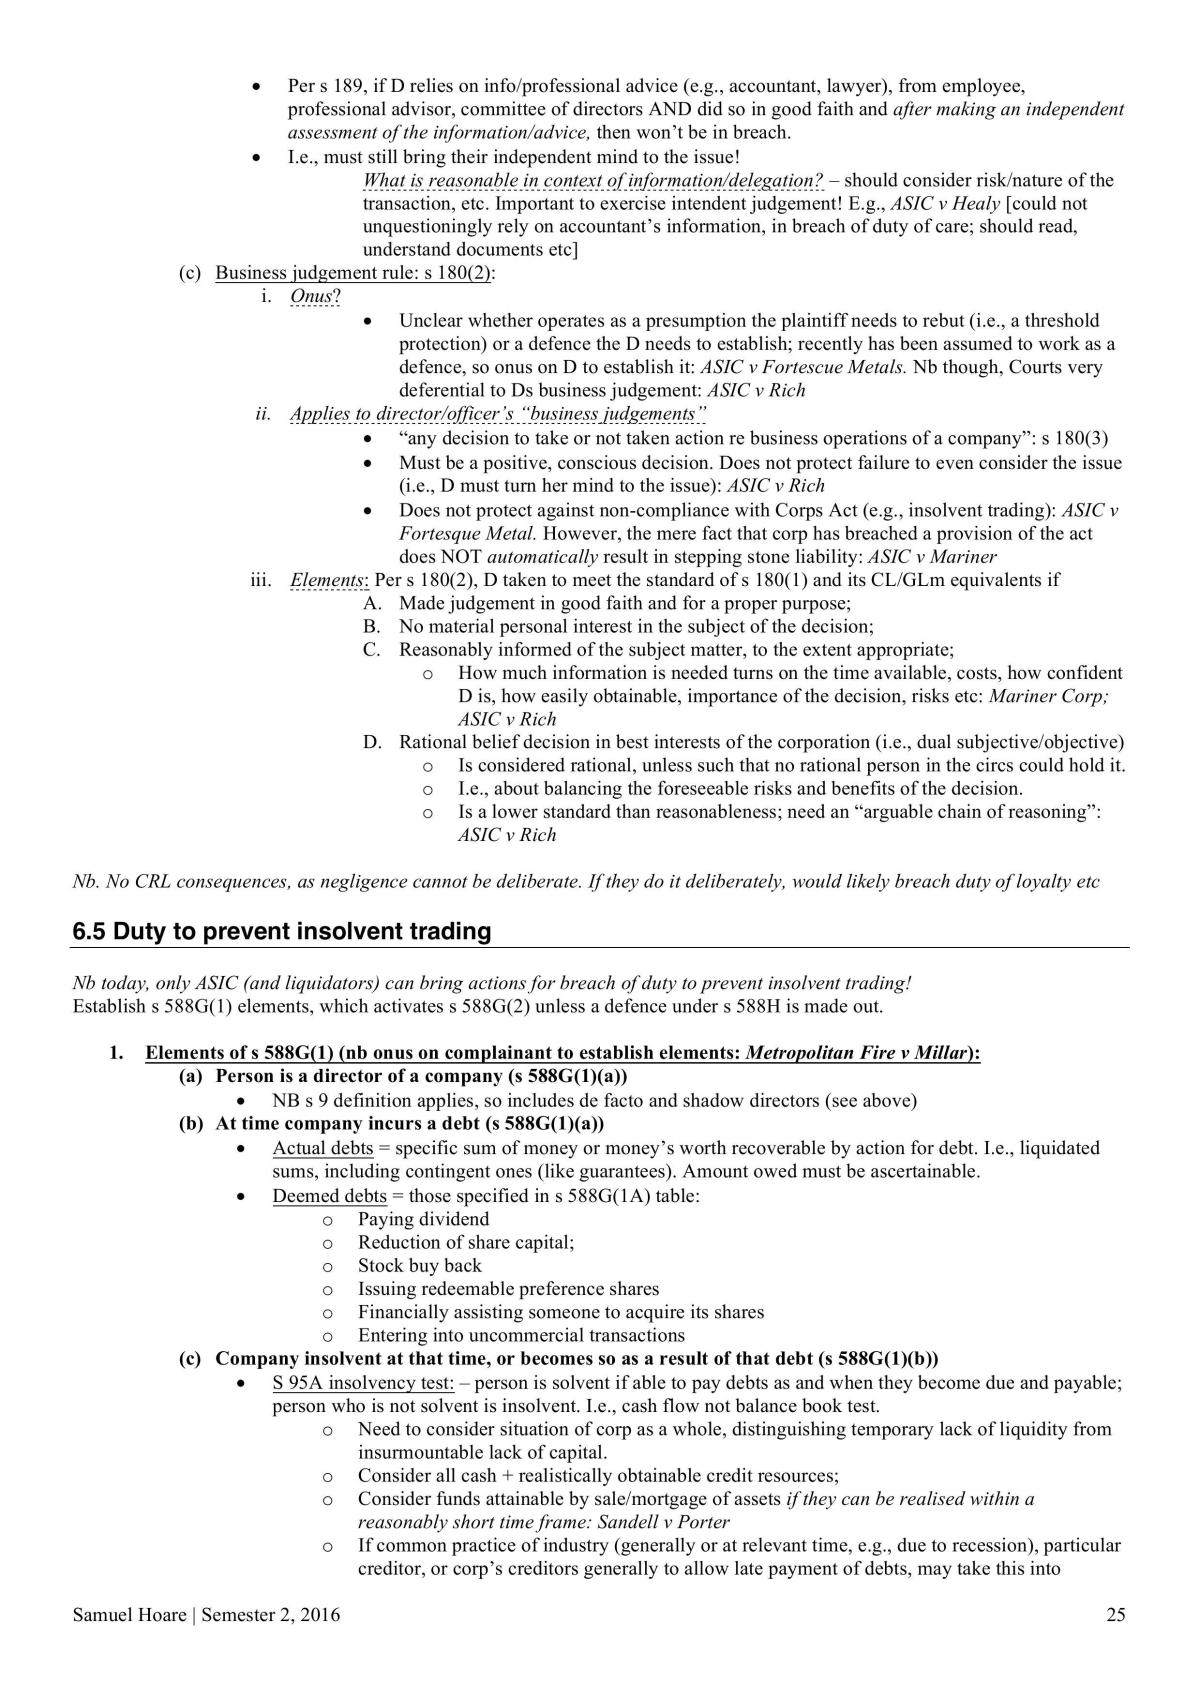 LAWS2014 Course Notes - Page 25